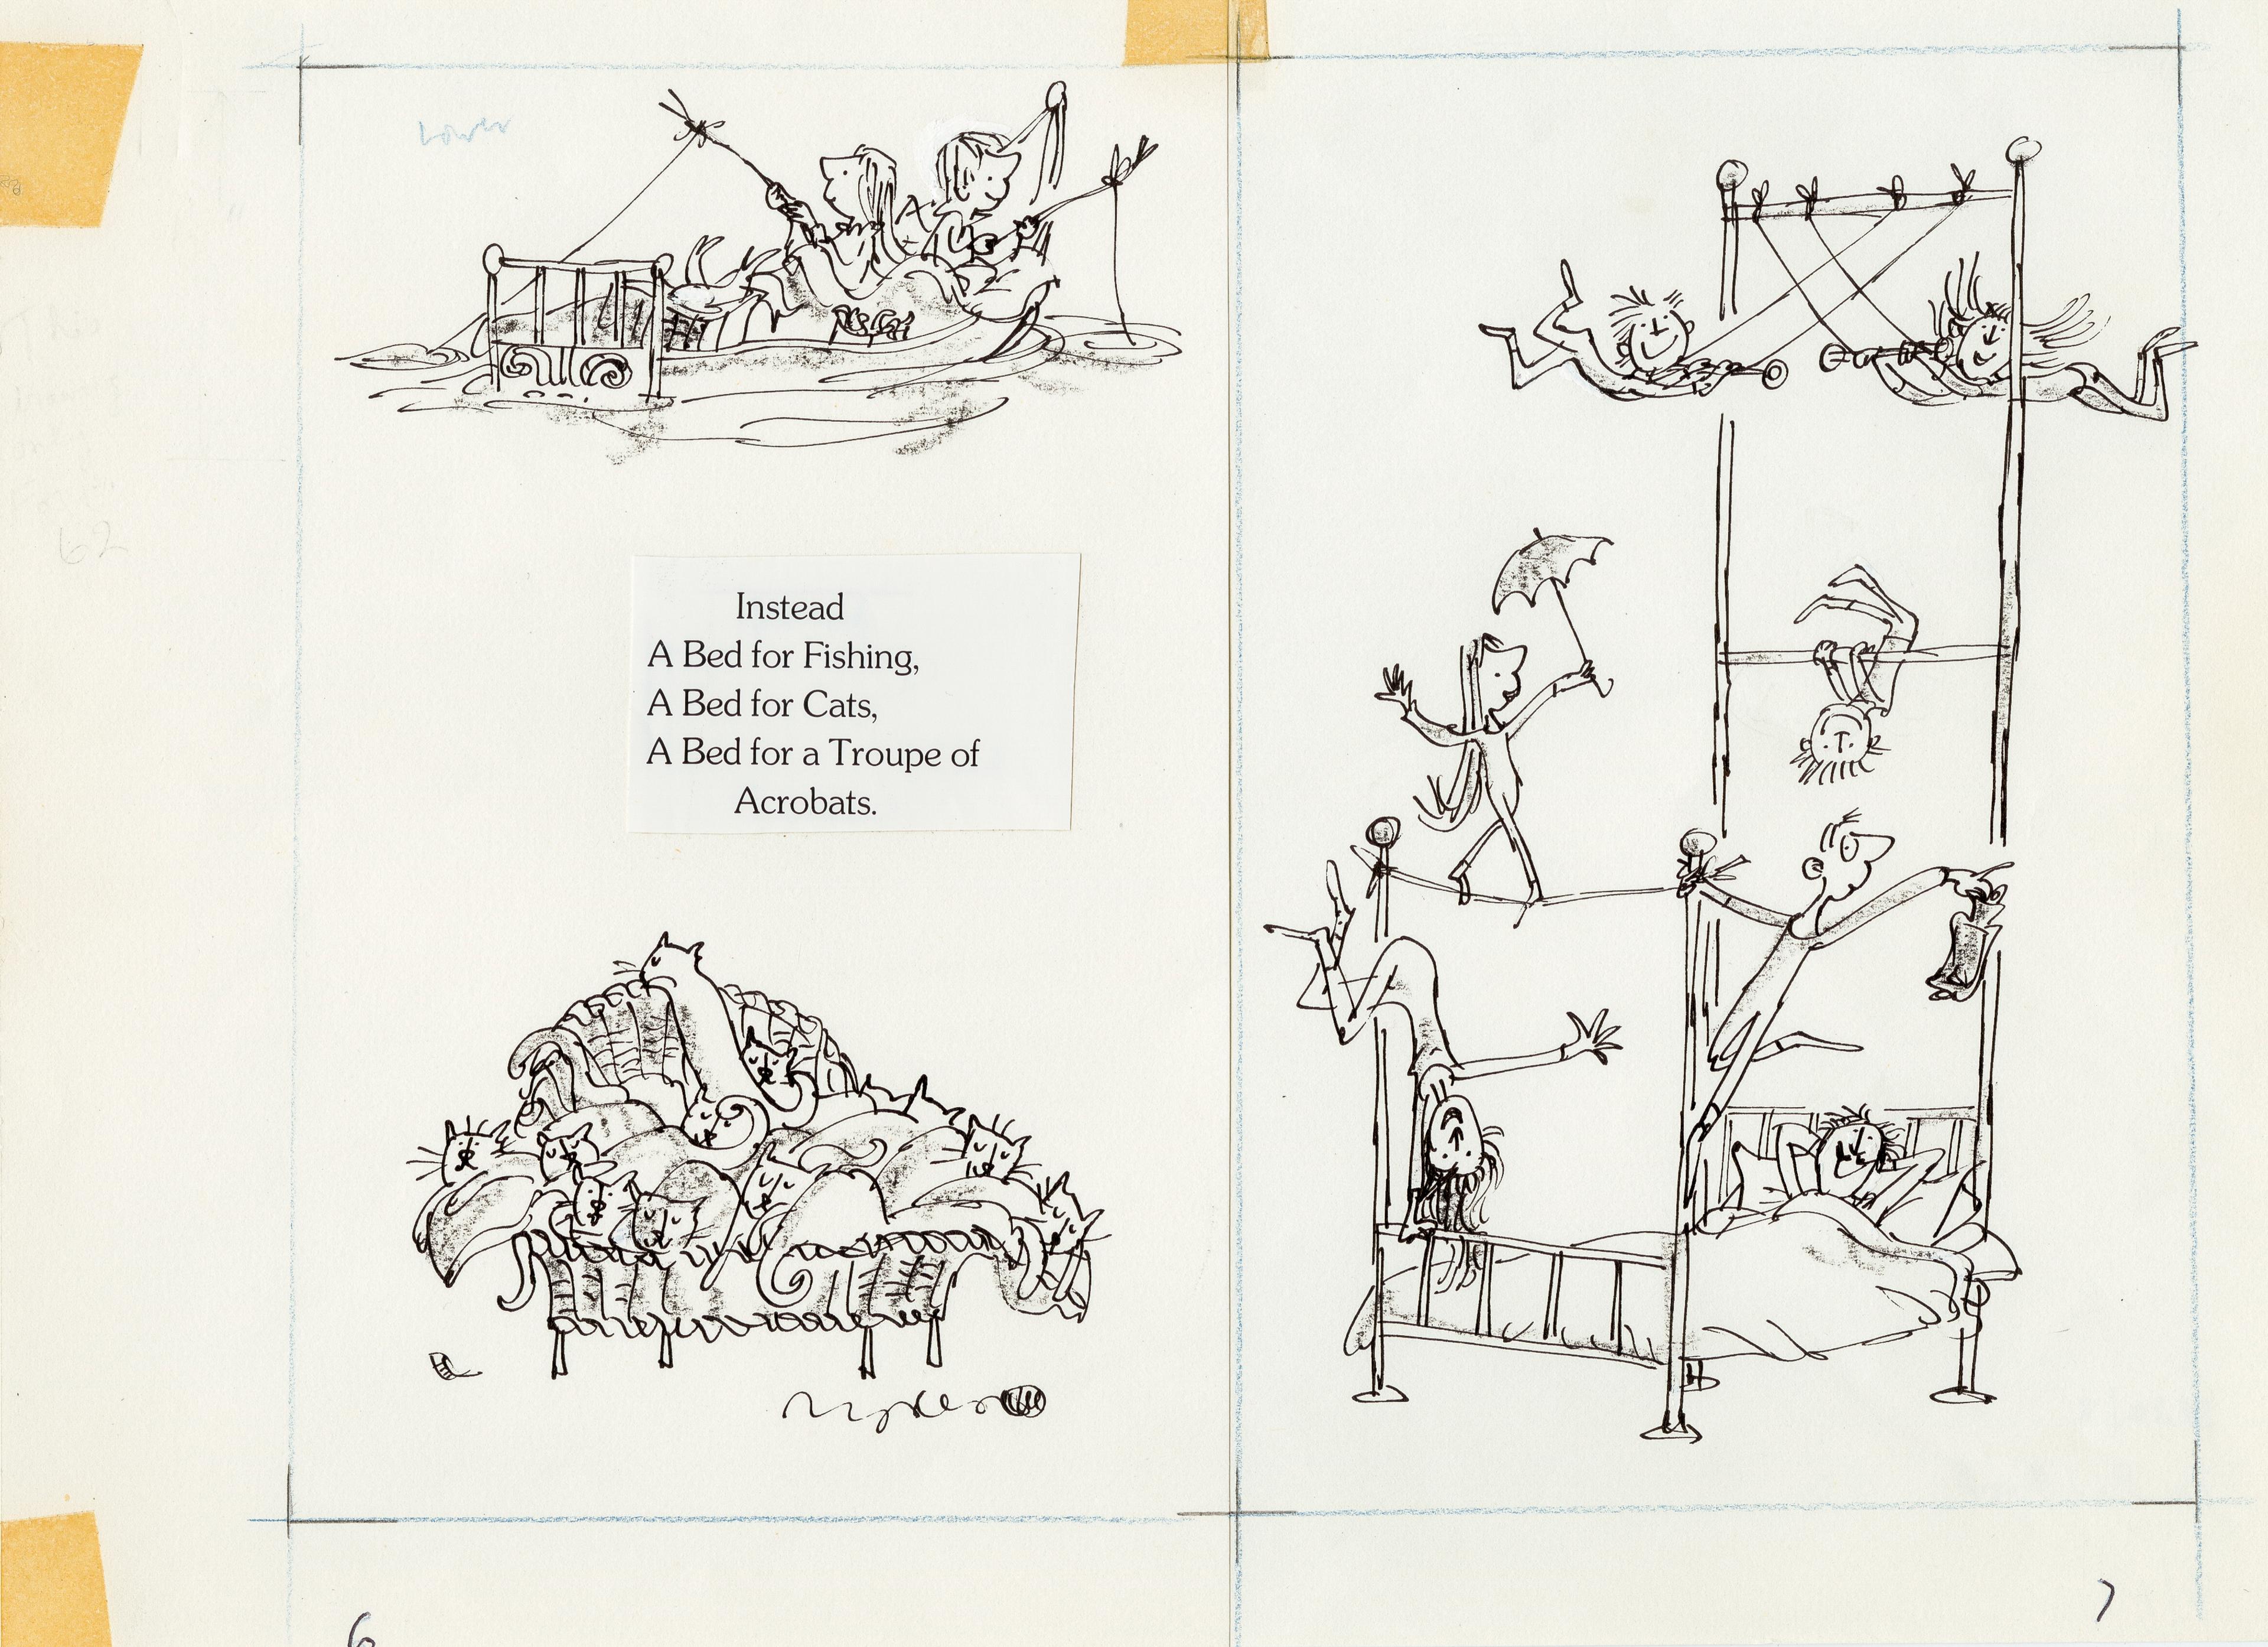 Line drawings of: children fishing from a bed boat, cats sleeping on a chaise lounge and people performing acrobatics on a bedframe.